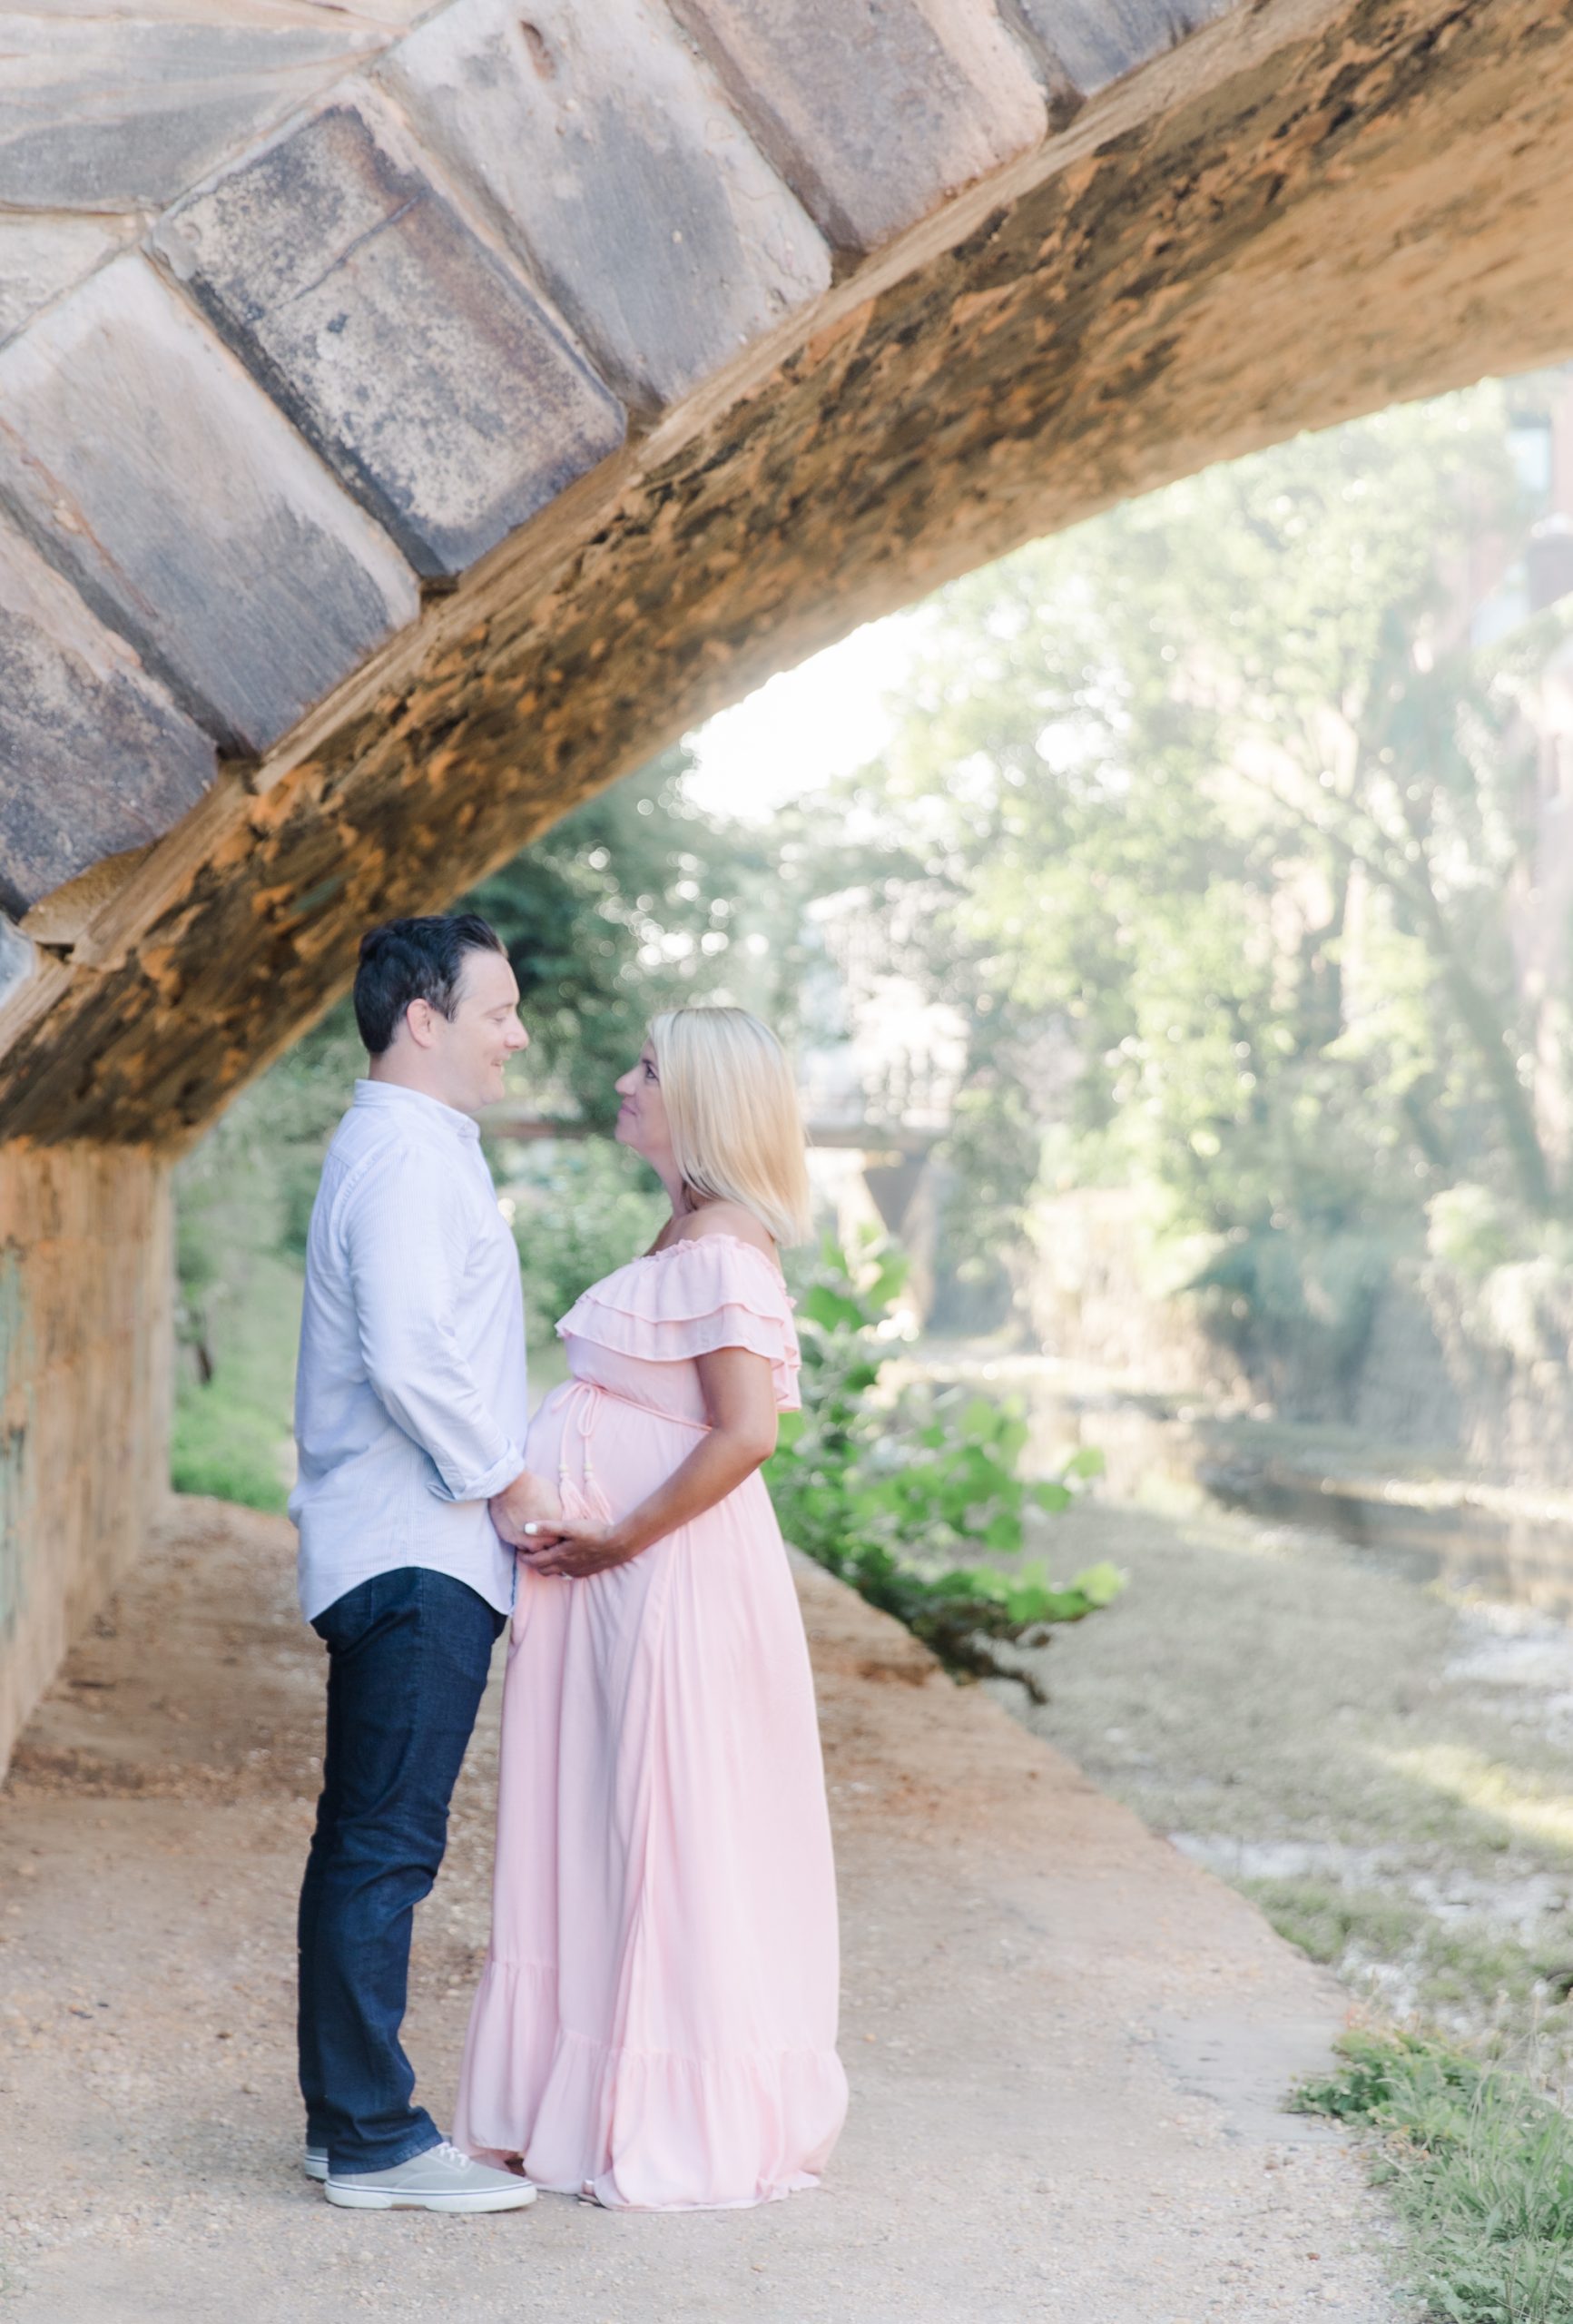 dad and mom-to-be posed near a stone bridge by the canal in Georgetown by northern virginia maternity photographer